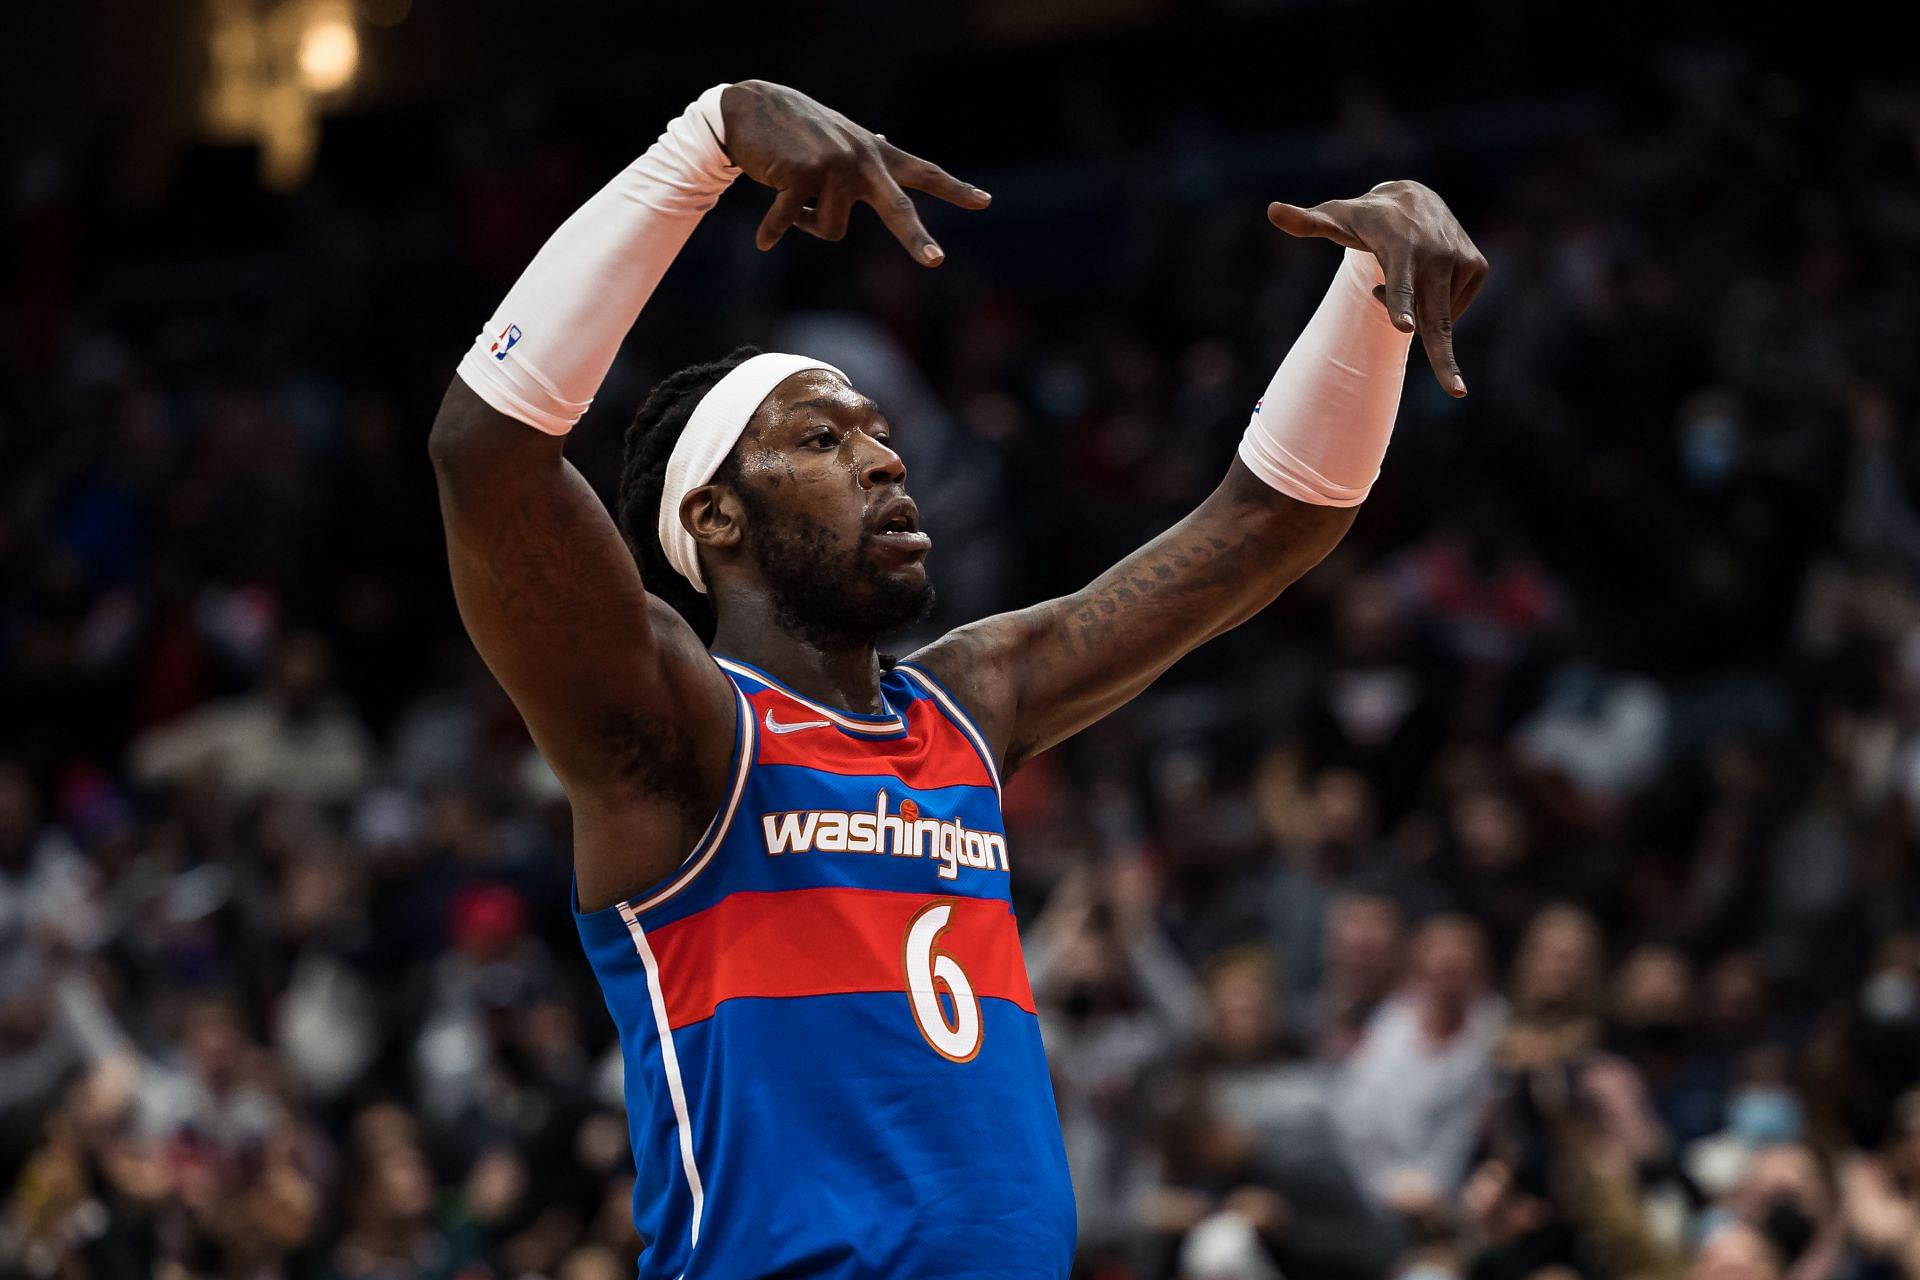 Montrezl Harrell of the Washington Wizards celebrates after making a bucket.